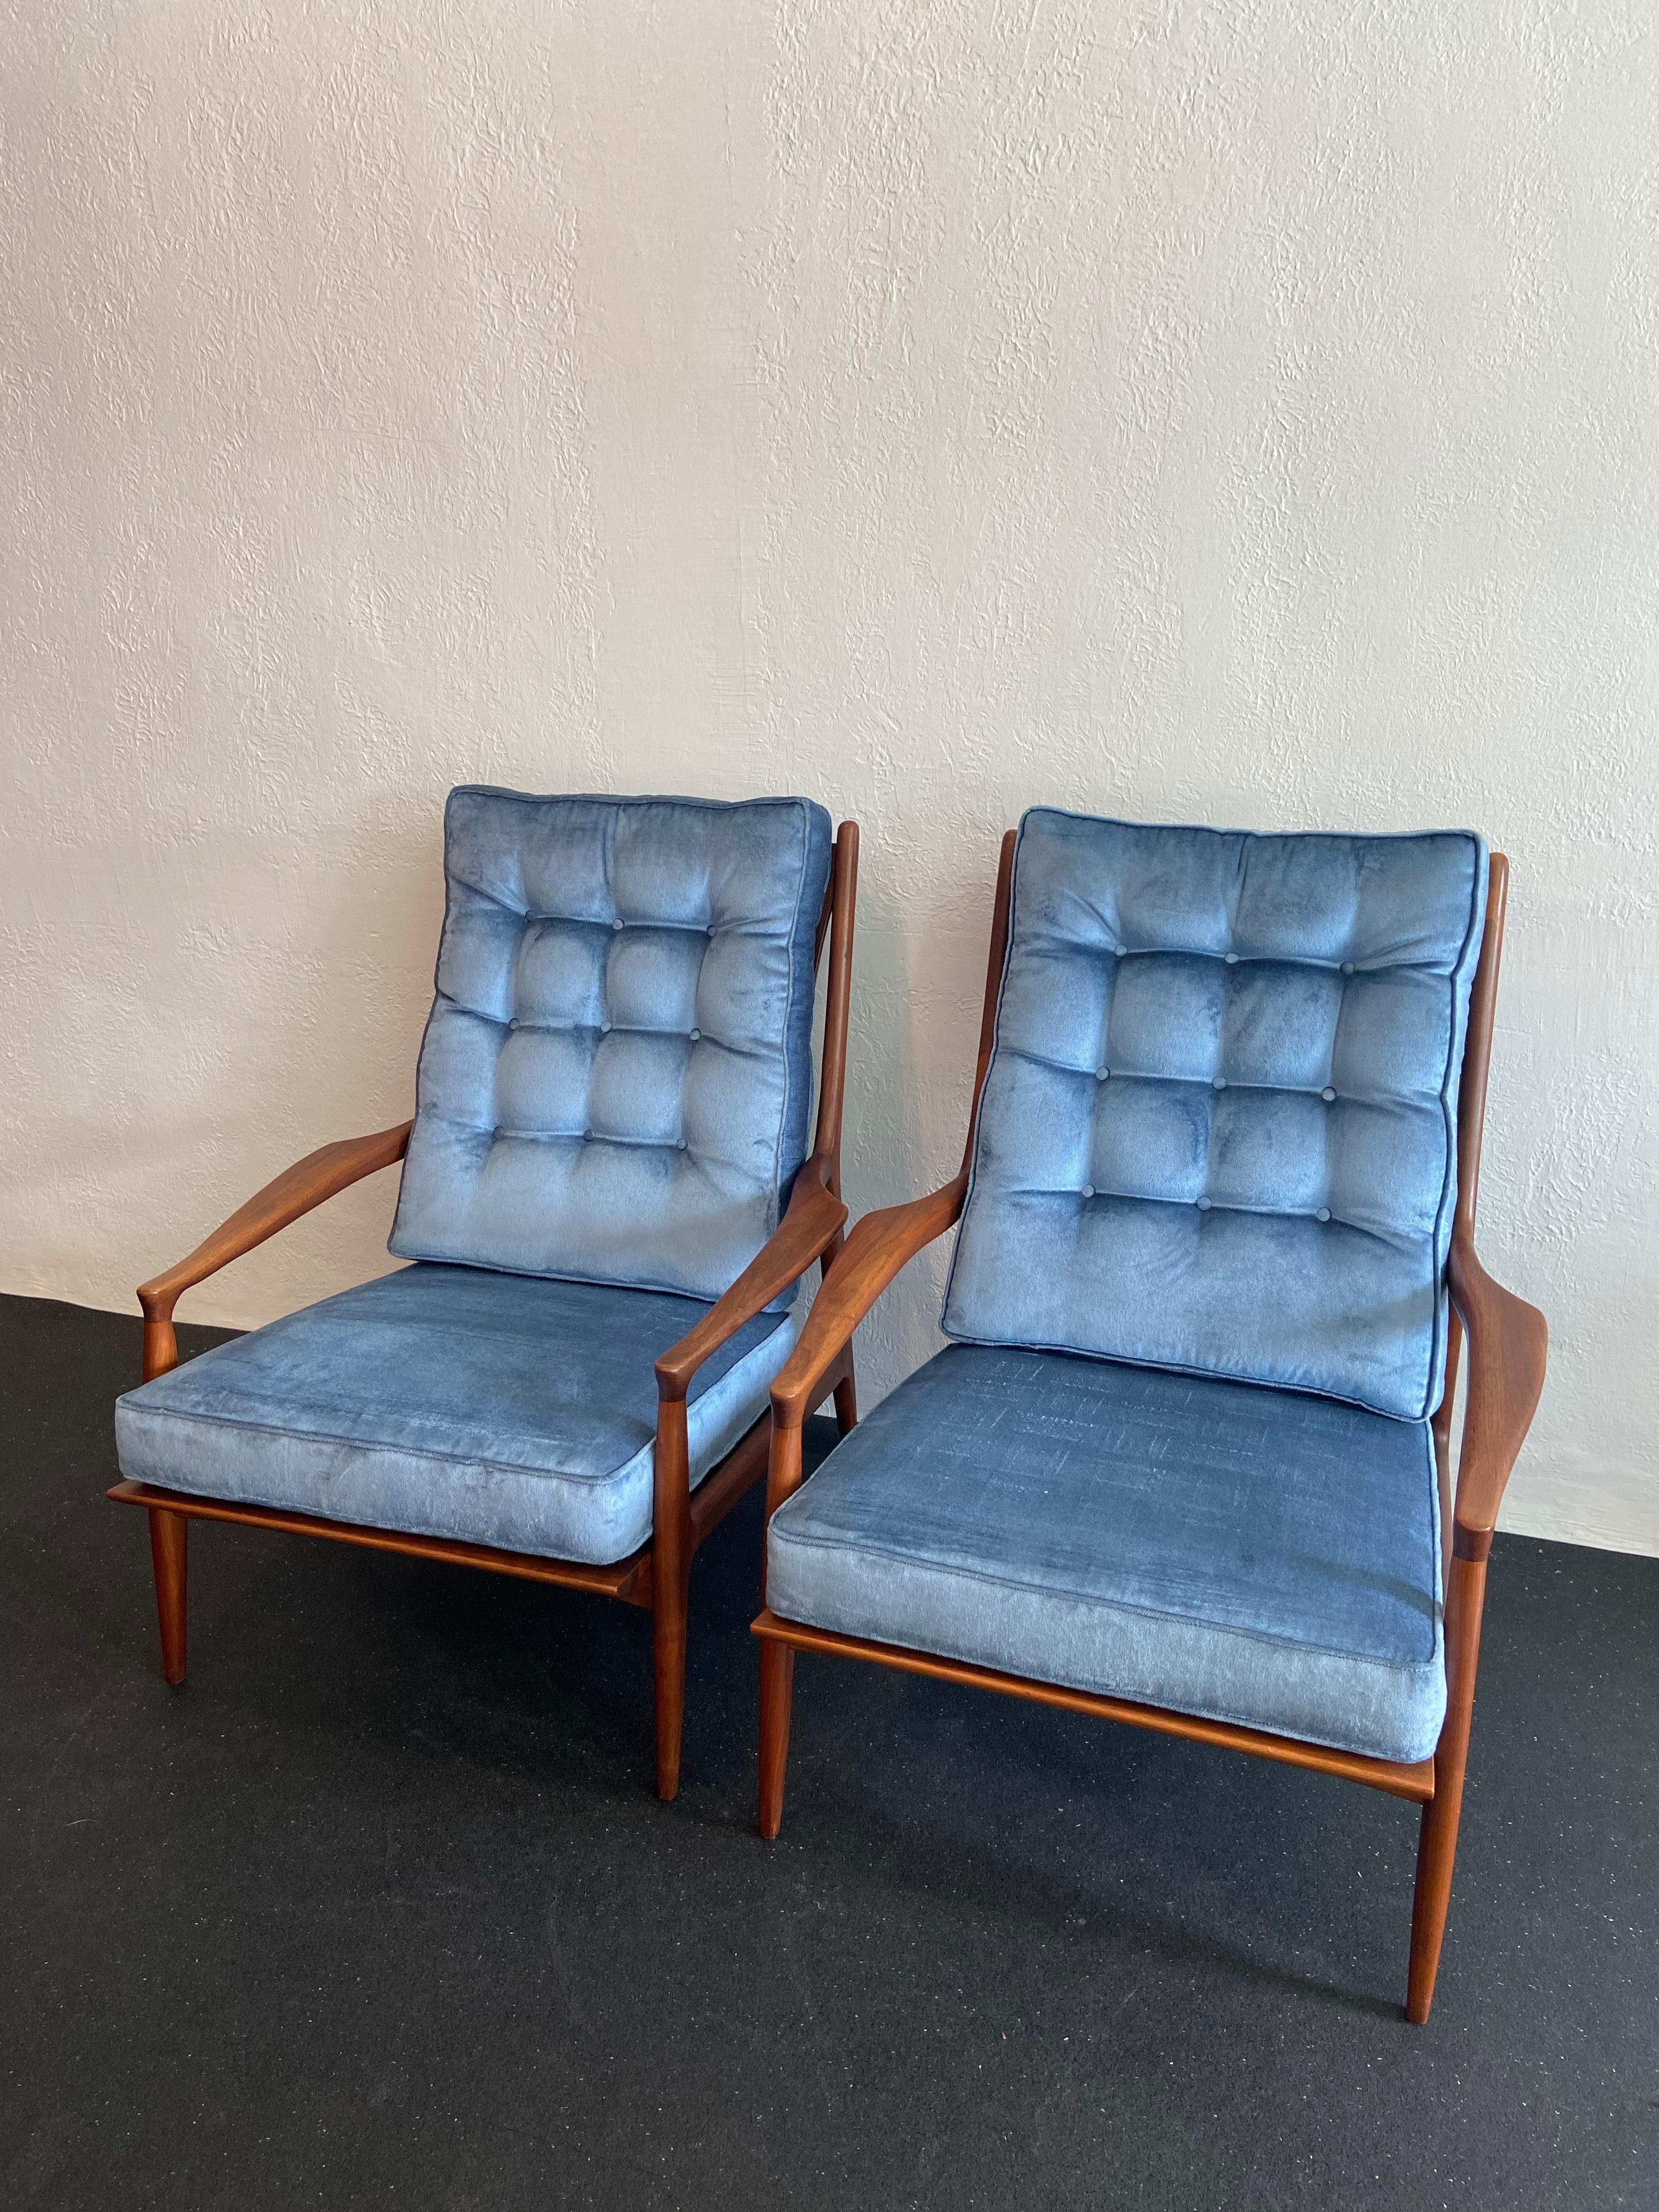 American Milo Baughman for Thayer Coggin High Back Archie Lounge Chairs, a Pair For Sale